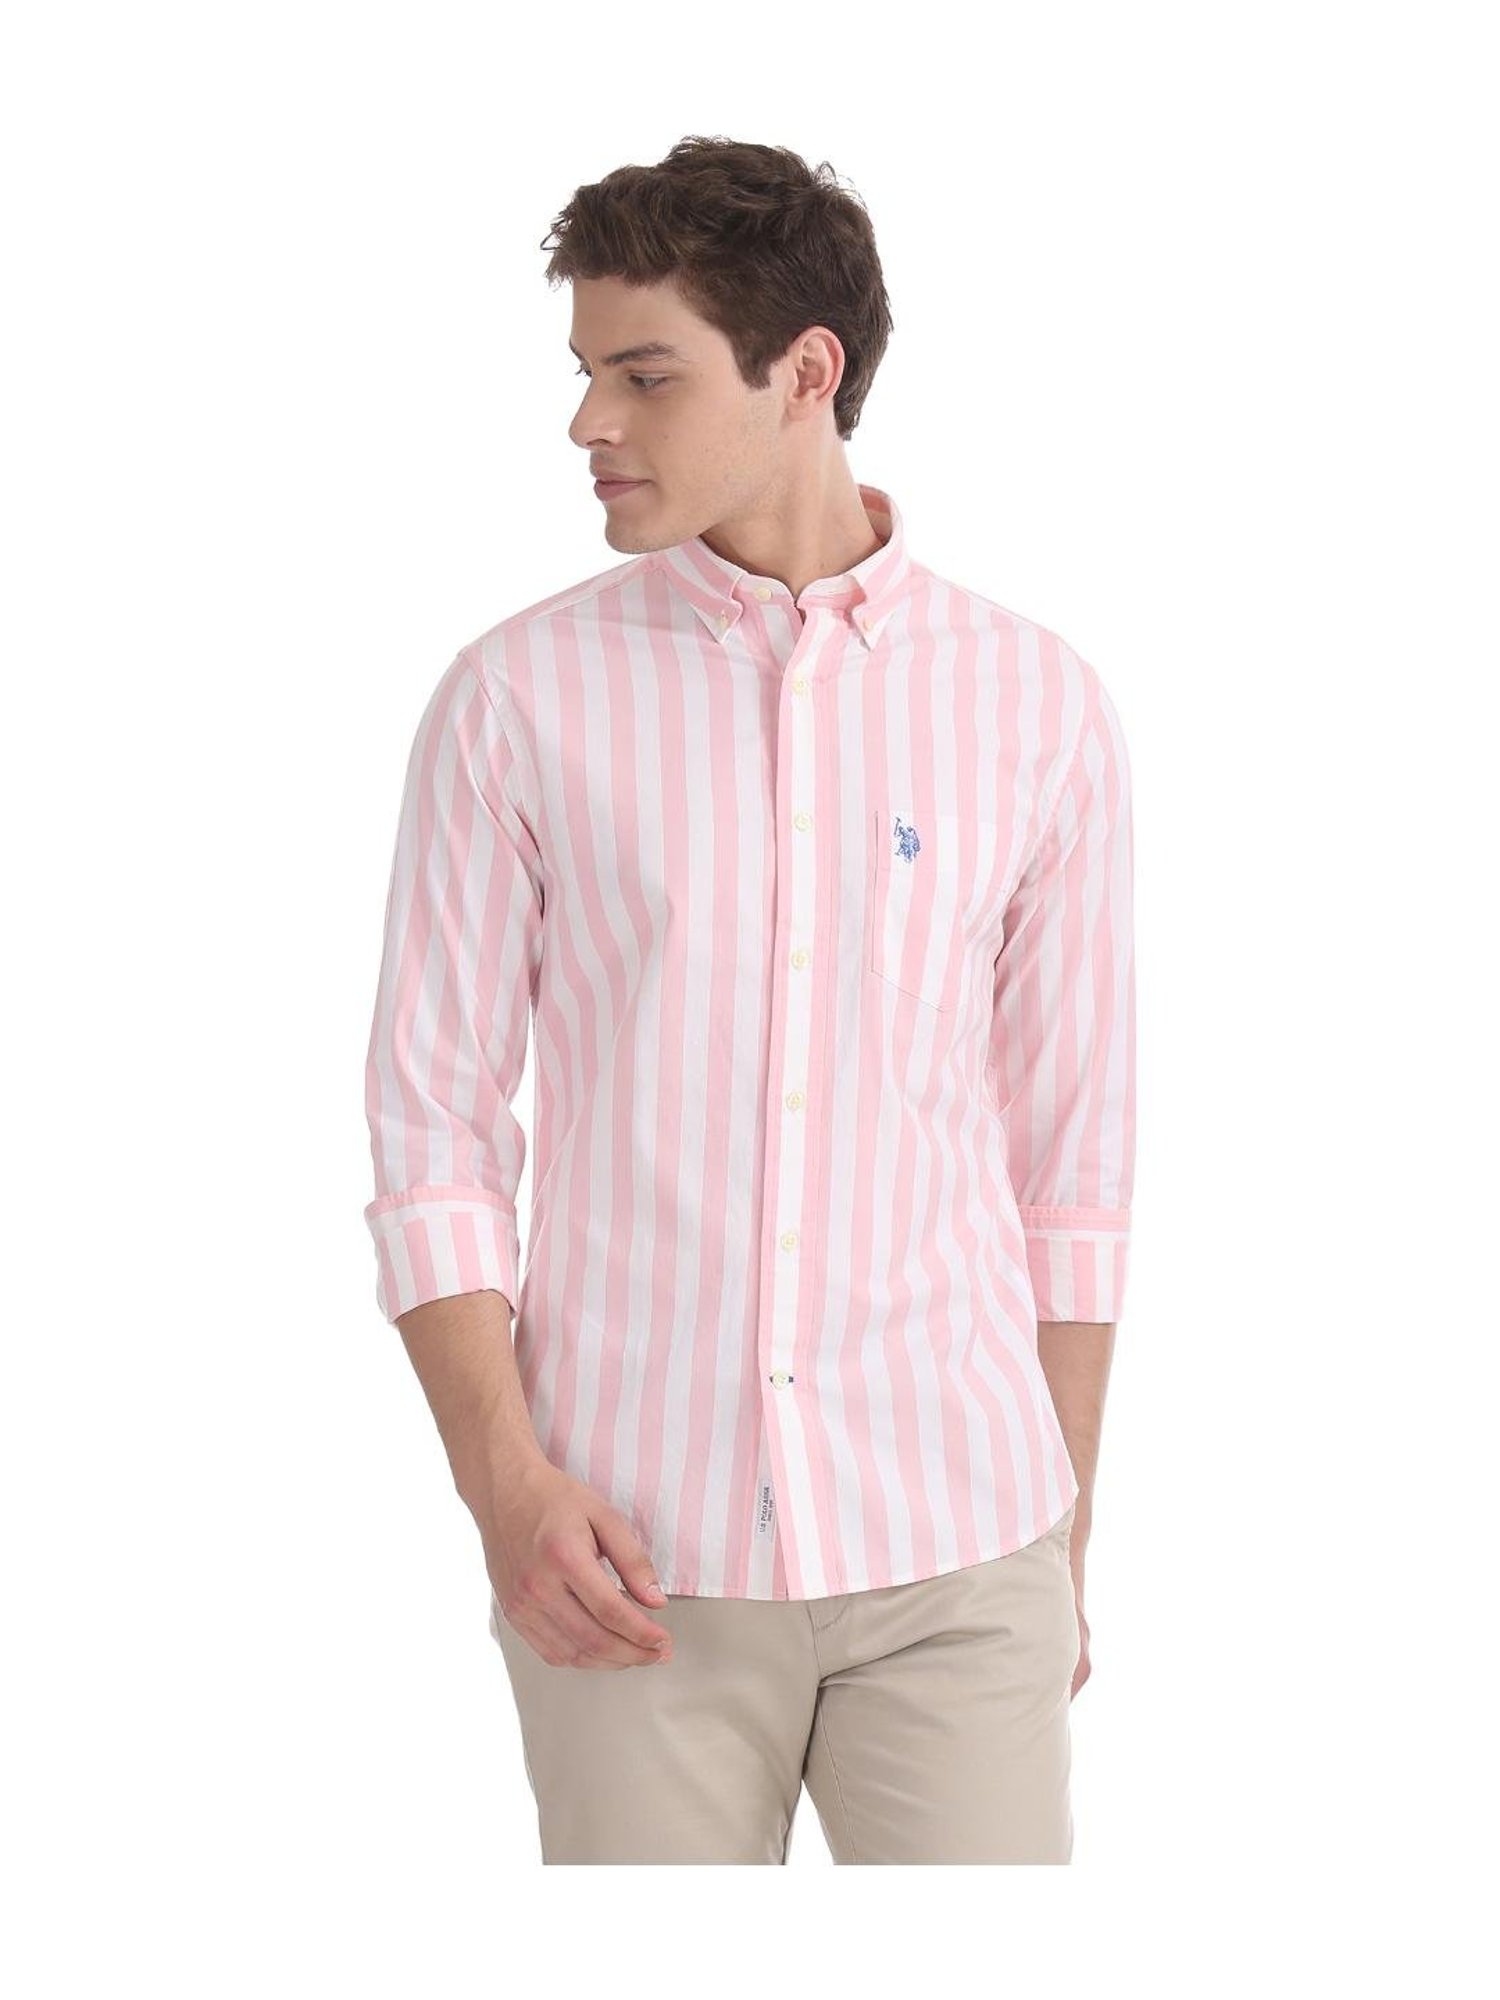 Hollywood Wide Stripe Shirt // Red + White (S) - PINK Shirtmaker - Touch of  Modern